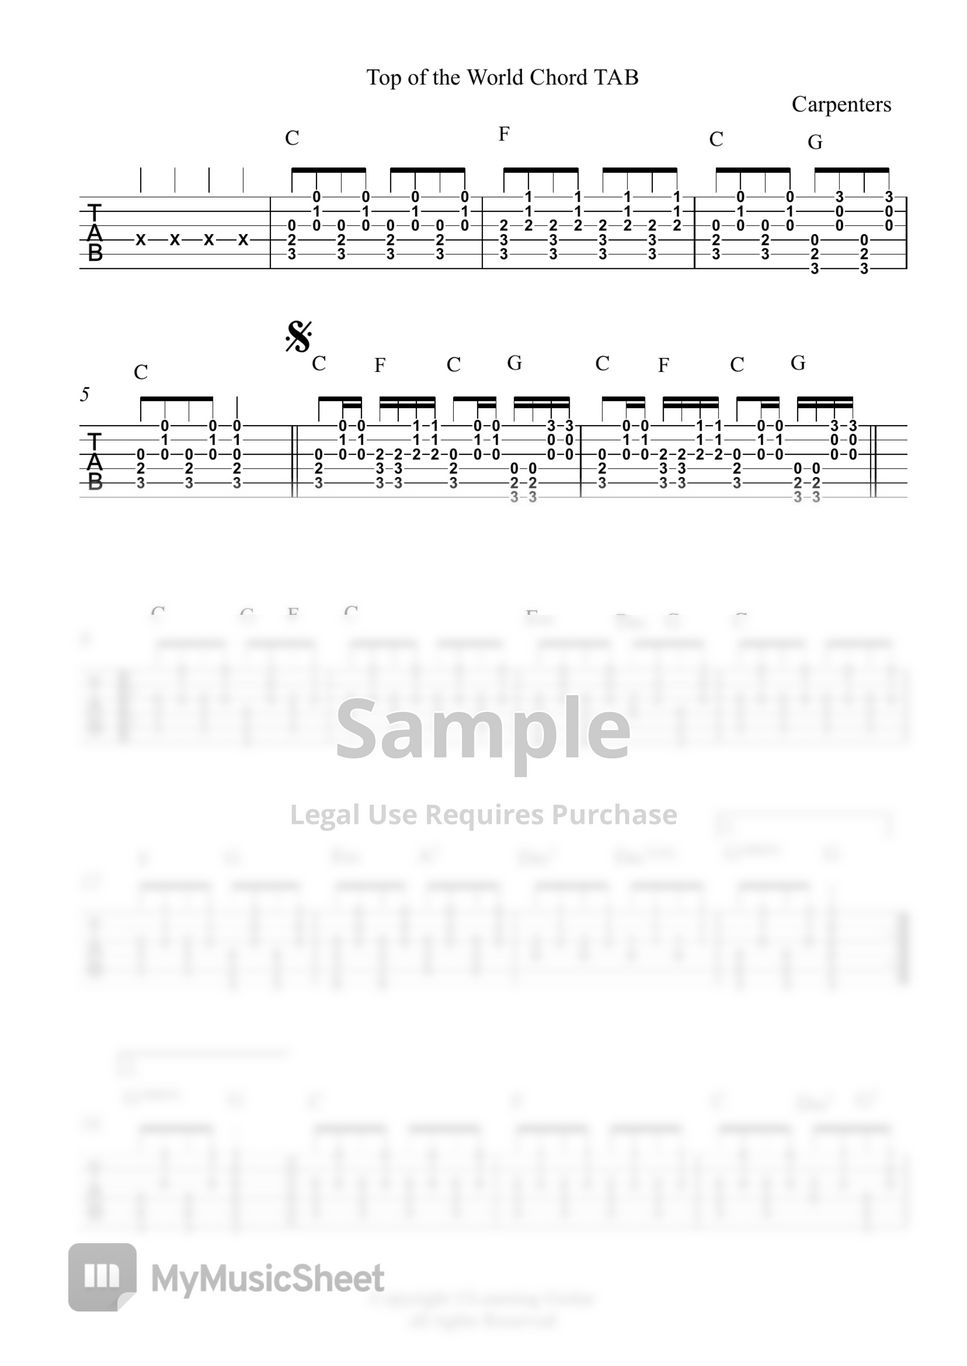 Carpenters - Top of The World Rhythm TAB by Learning Guitar